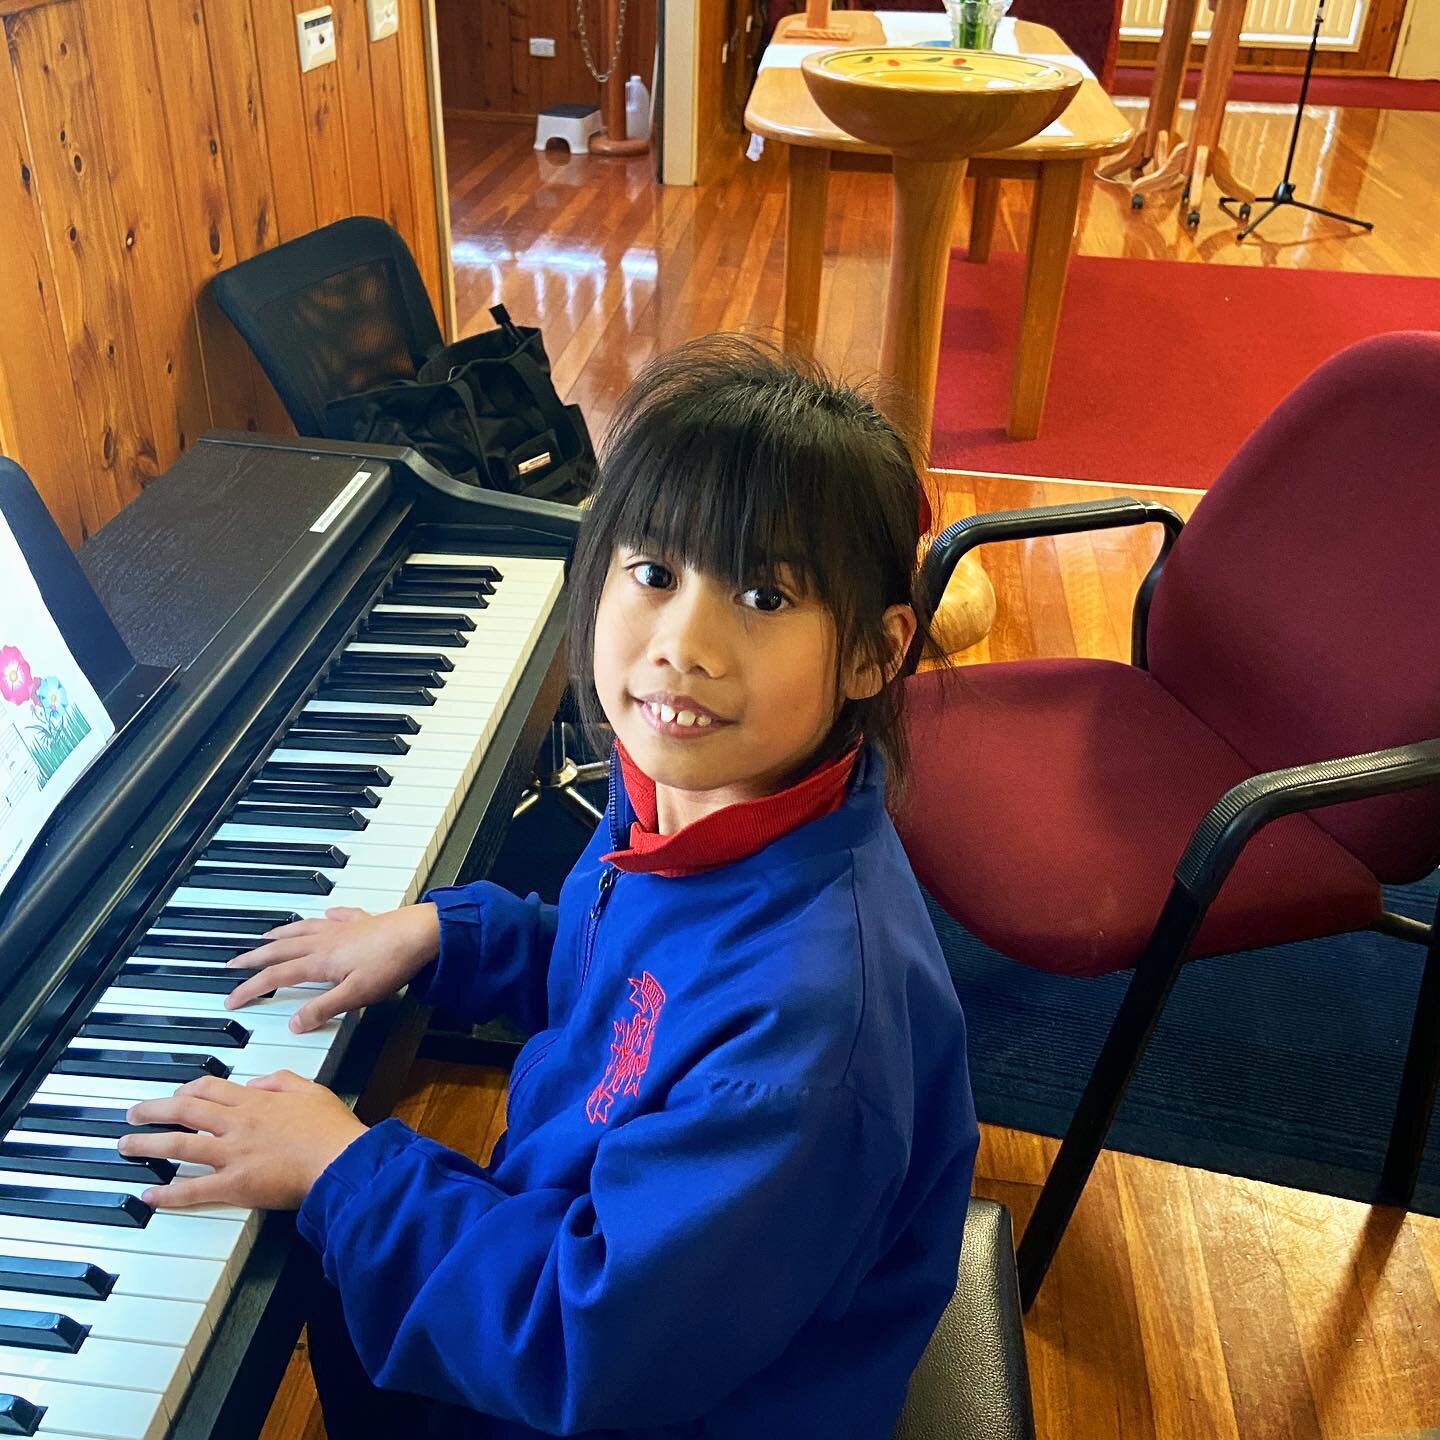 🎵 This little musician has been hitting all the right notes! So incredibly proud to see Venice's progress this term on her piano journey. She's been pouring her heart and soul into every piece she plays and every lesson she takes.

It&rsquo;s great 